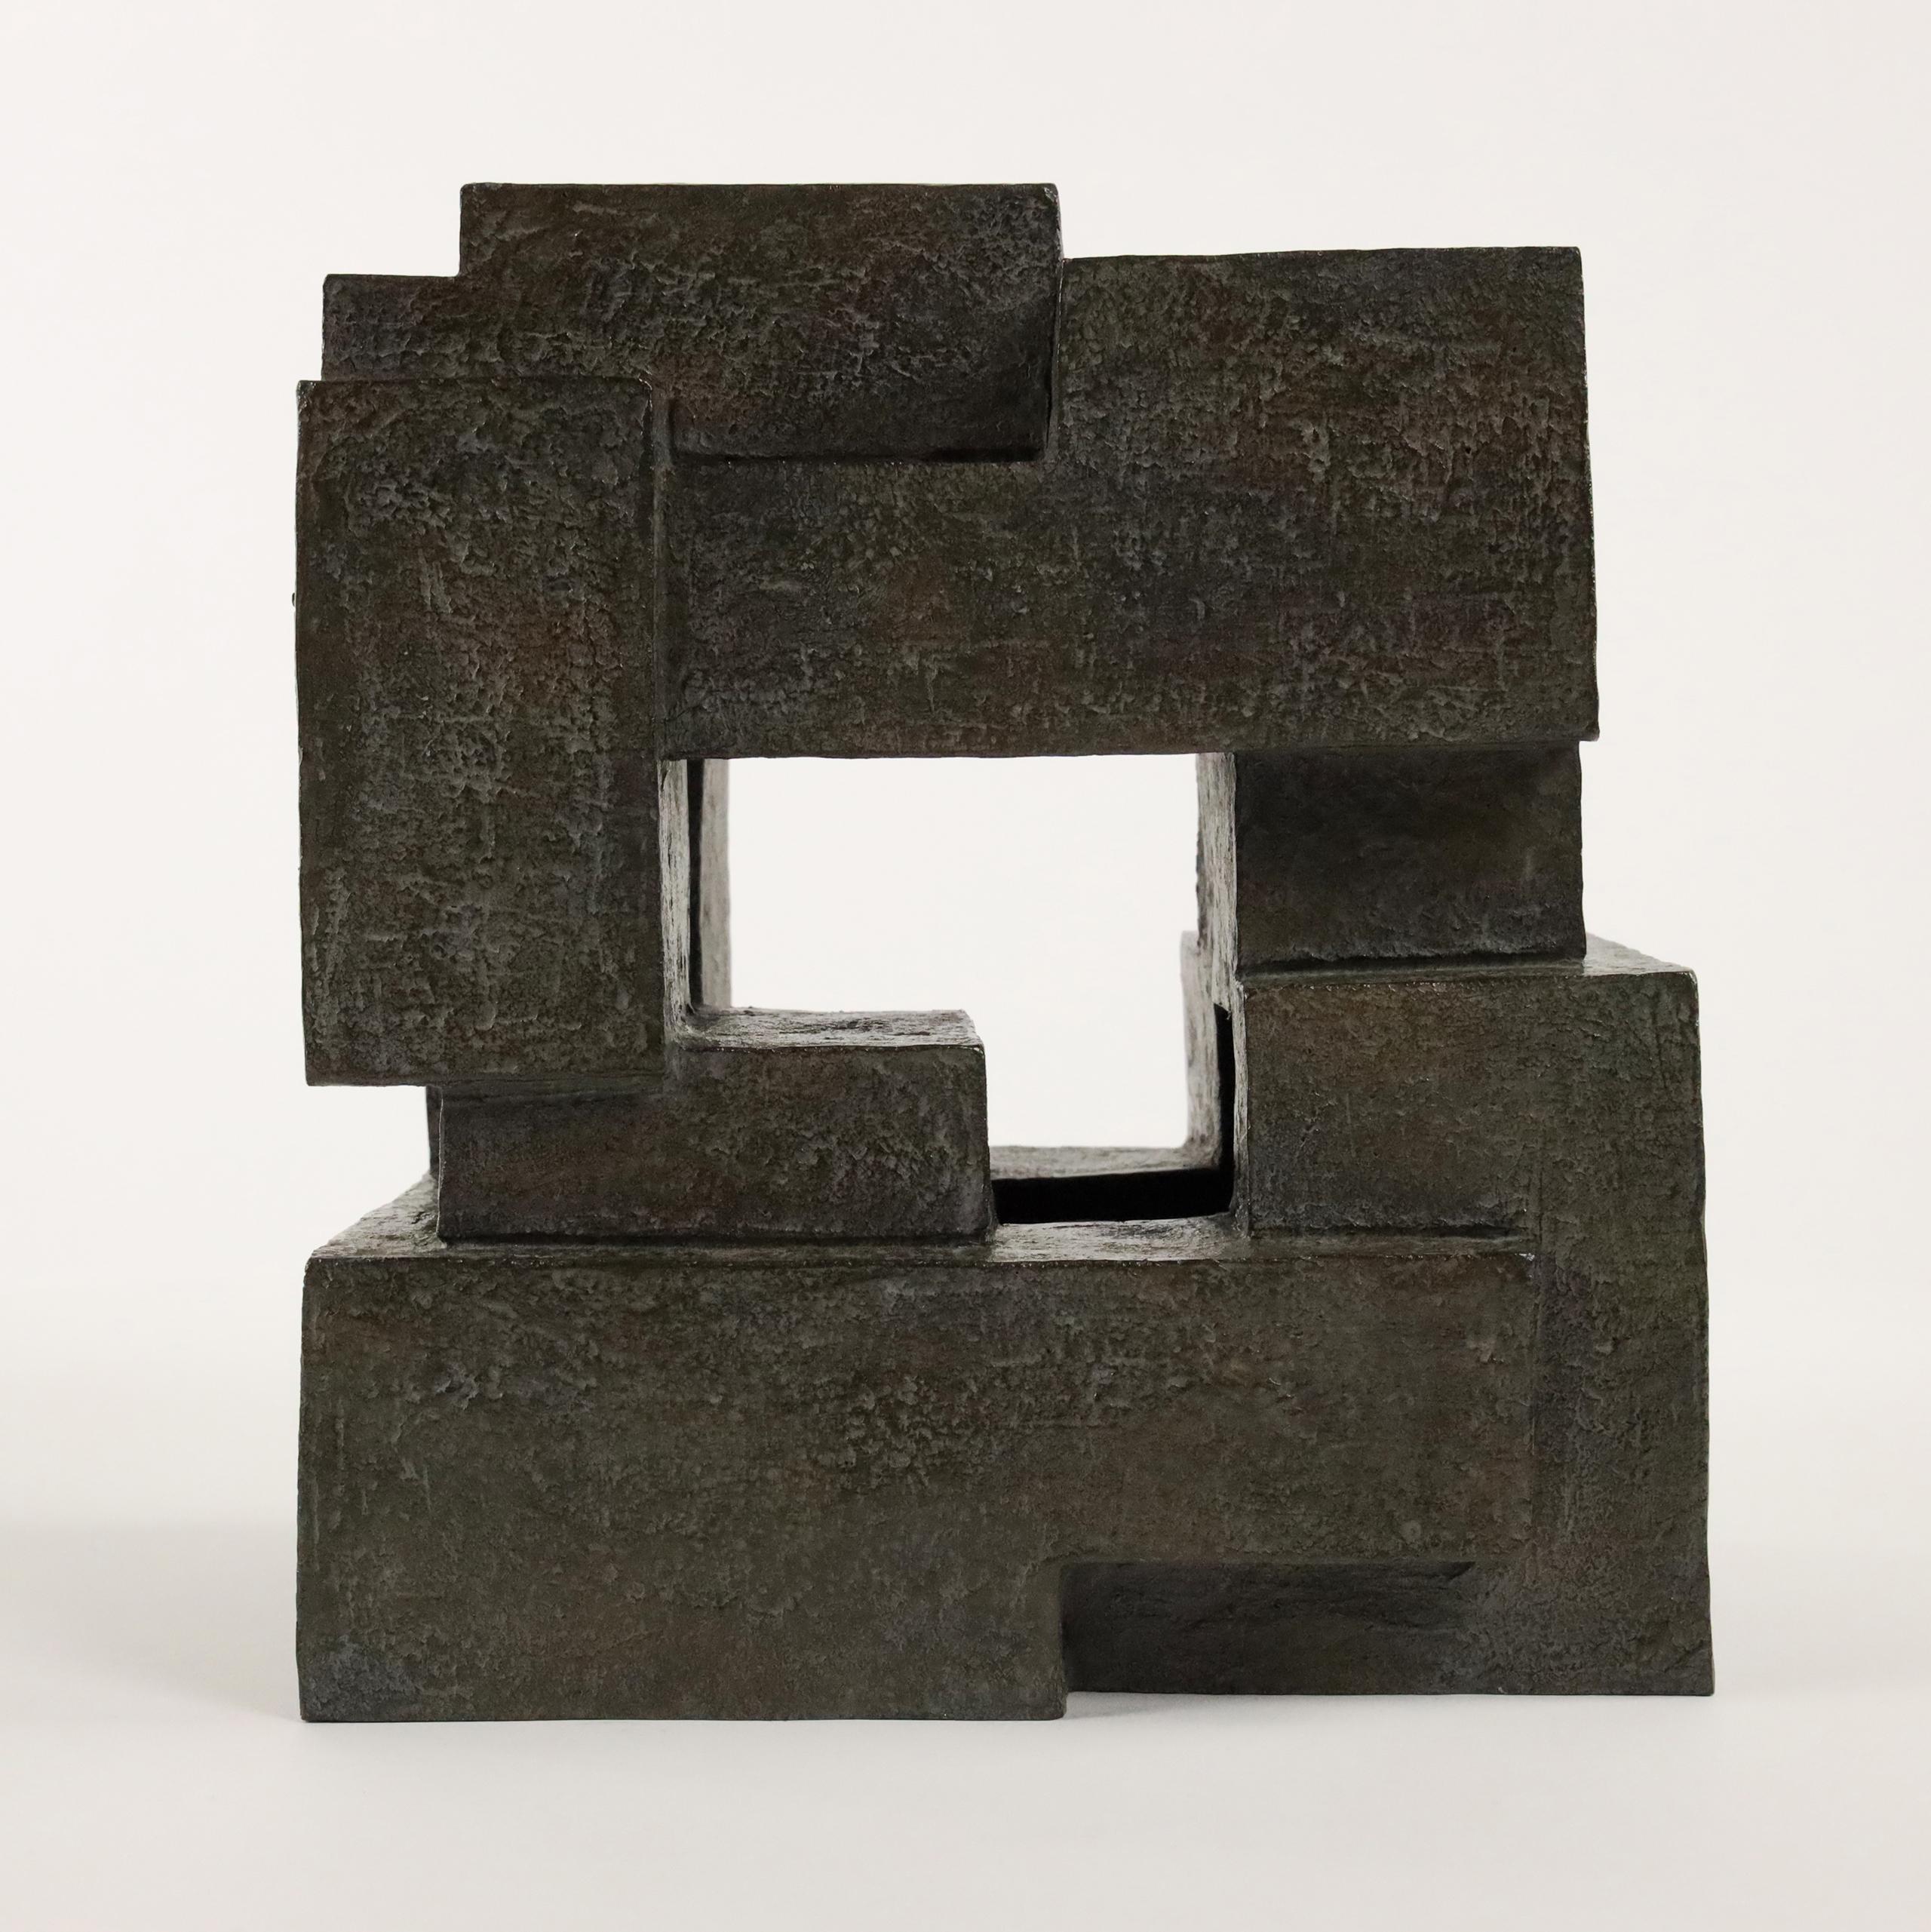 Block VIII is a bronze sculpture by French contemporary artist Delphine Brabant from the series "Architecture".
23 cm × 20 cm × 16 cm. Limited edition of 8 and 4 artist's proofs.
In this series, the artist designs geometric shapes bringing together